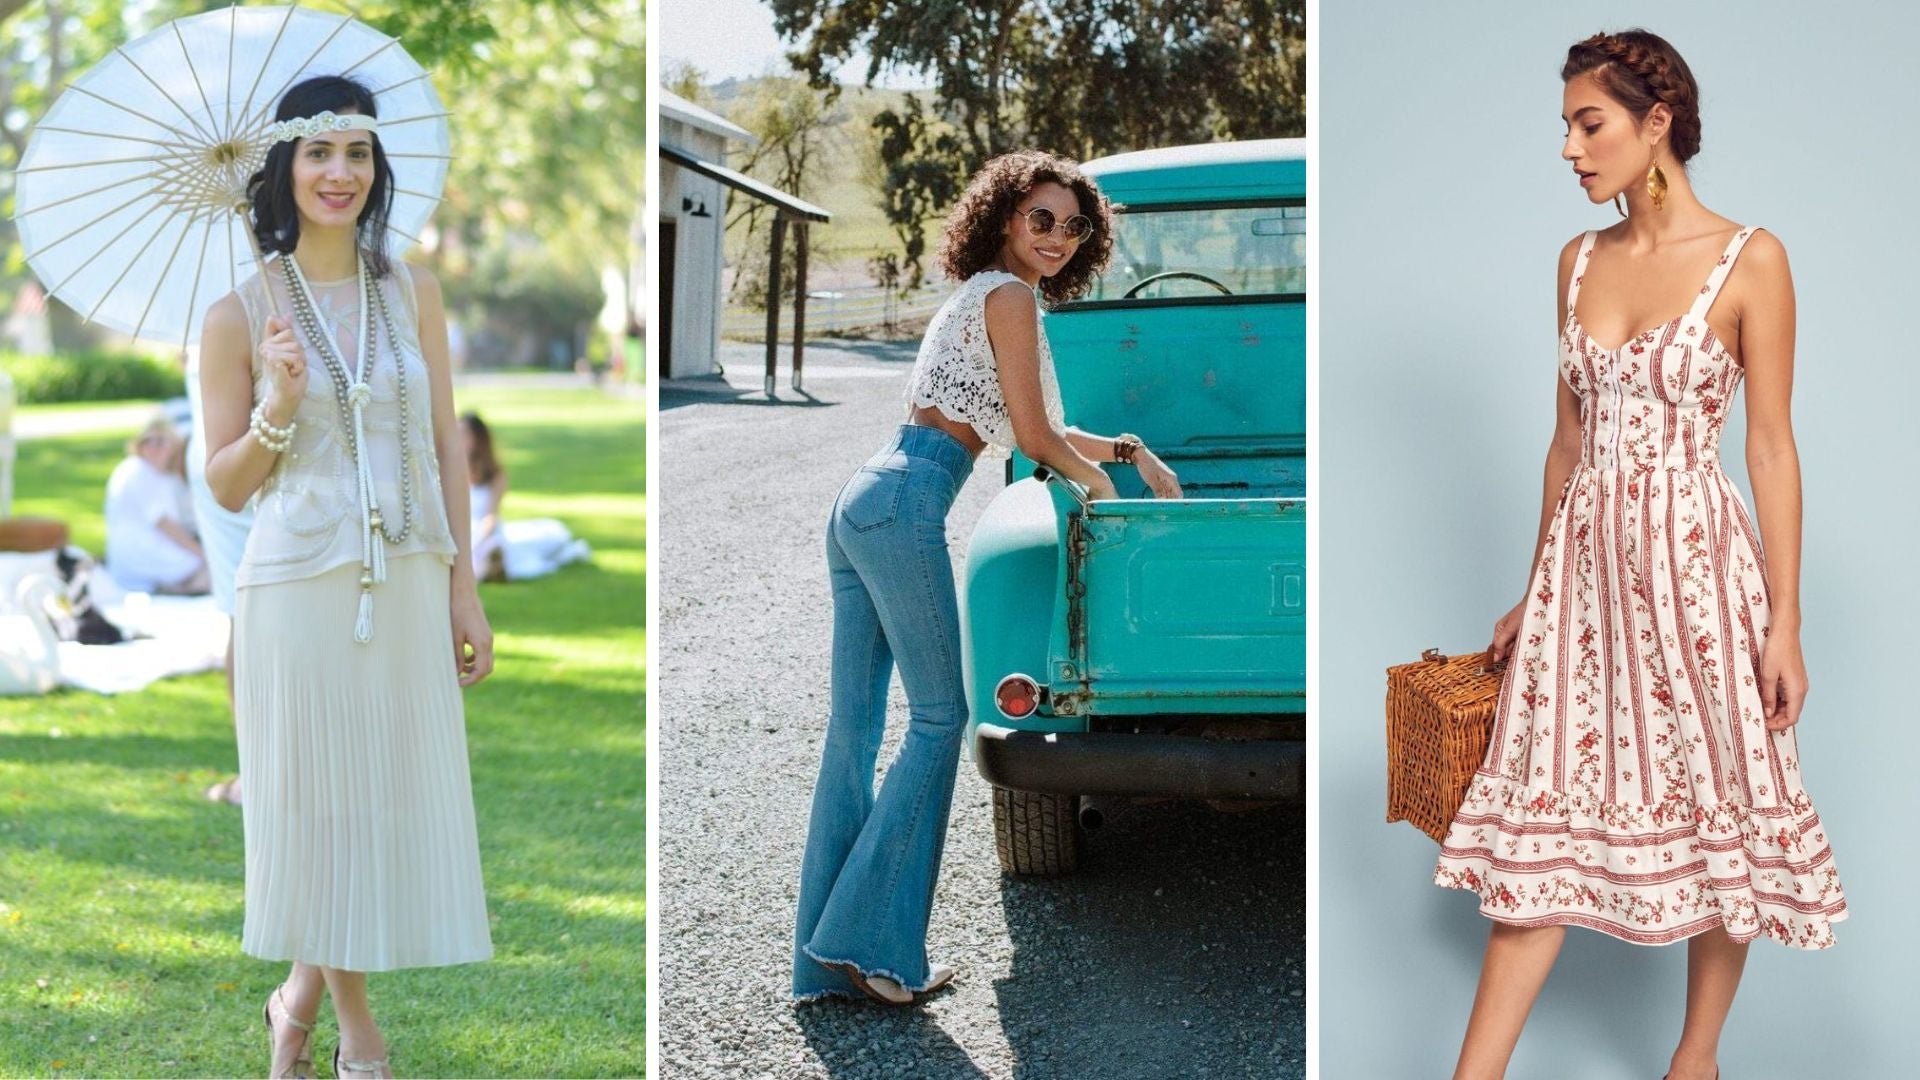 Eternal Summer Reviving Vintage Styles For Today's Fashion